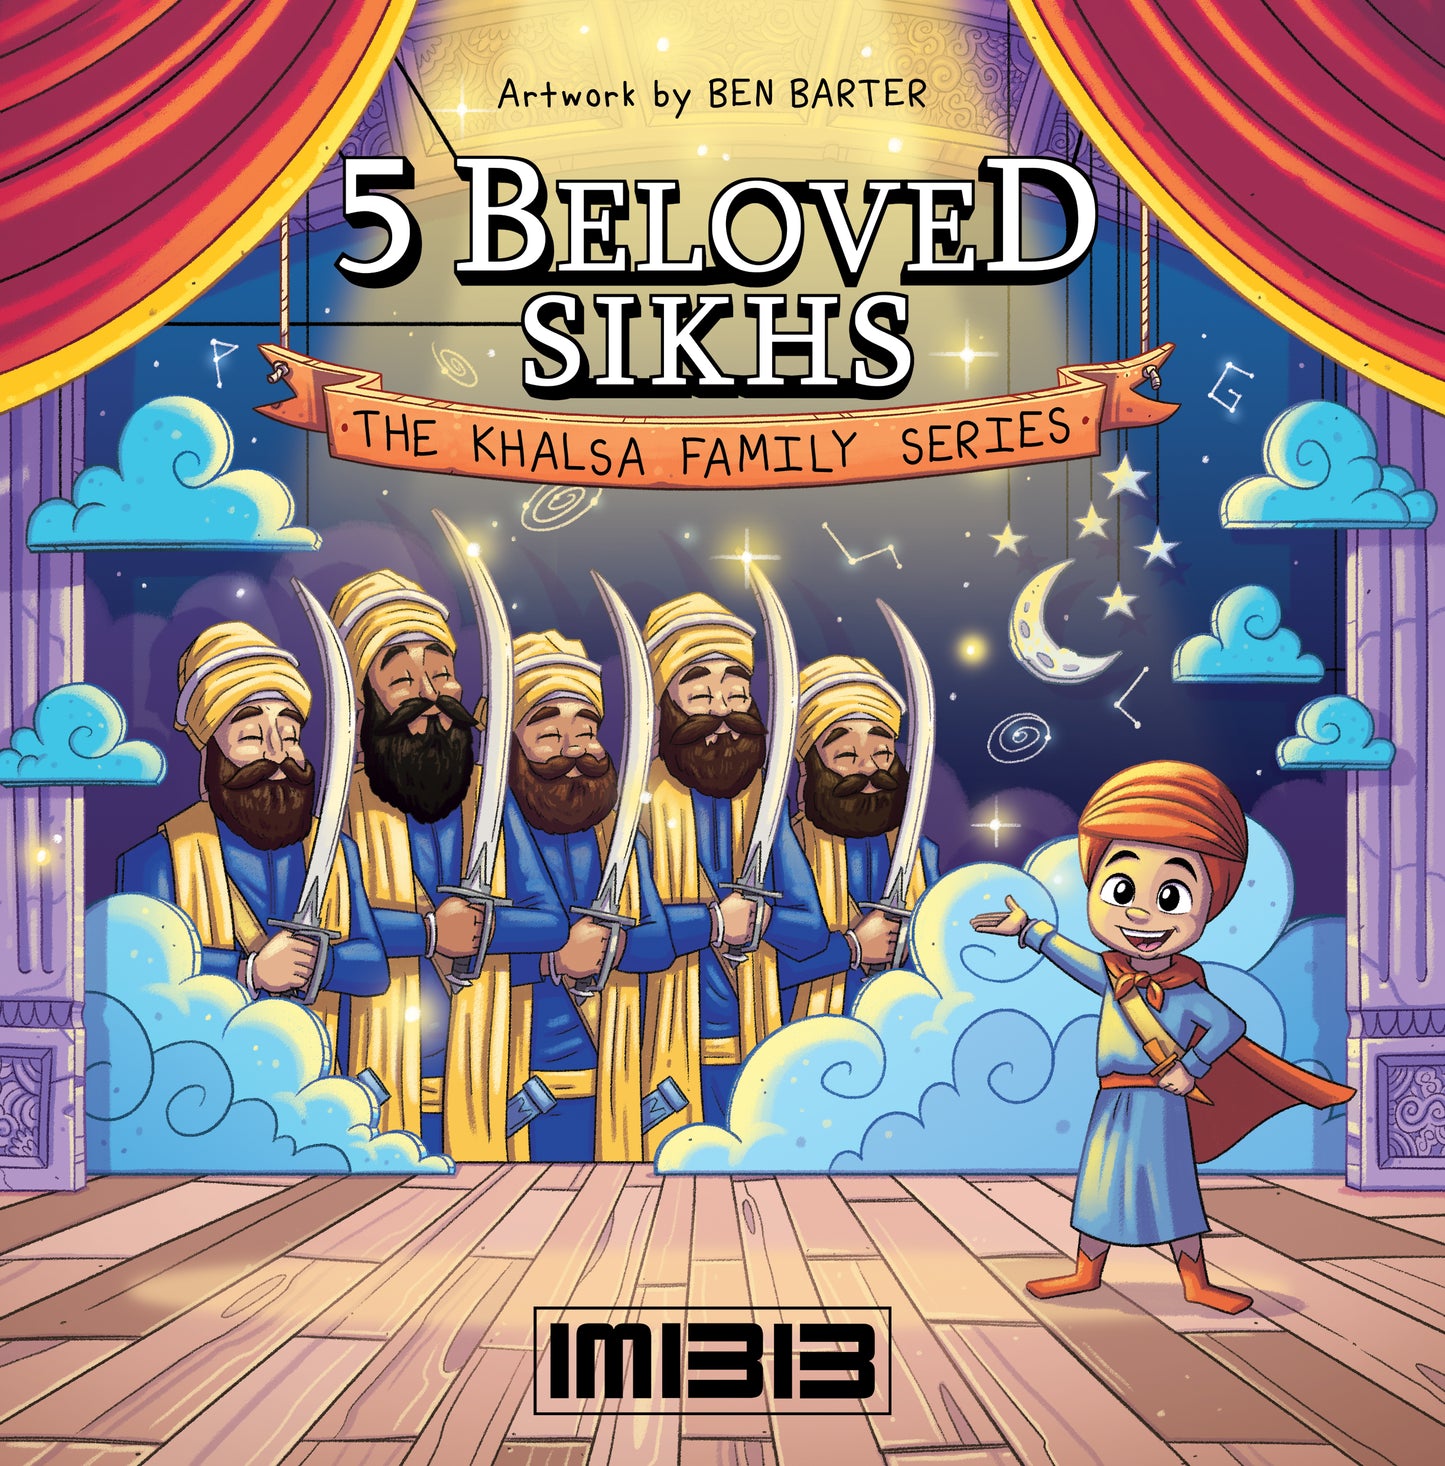 The Khalsa Family Series: 5 Beloved Sikhs Book